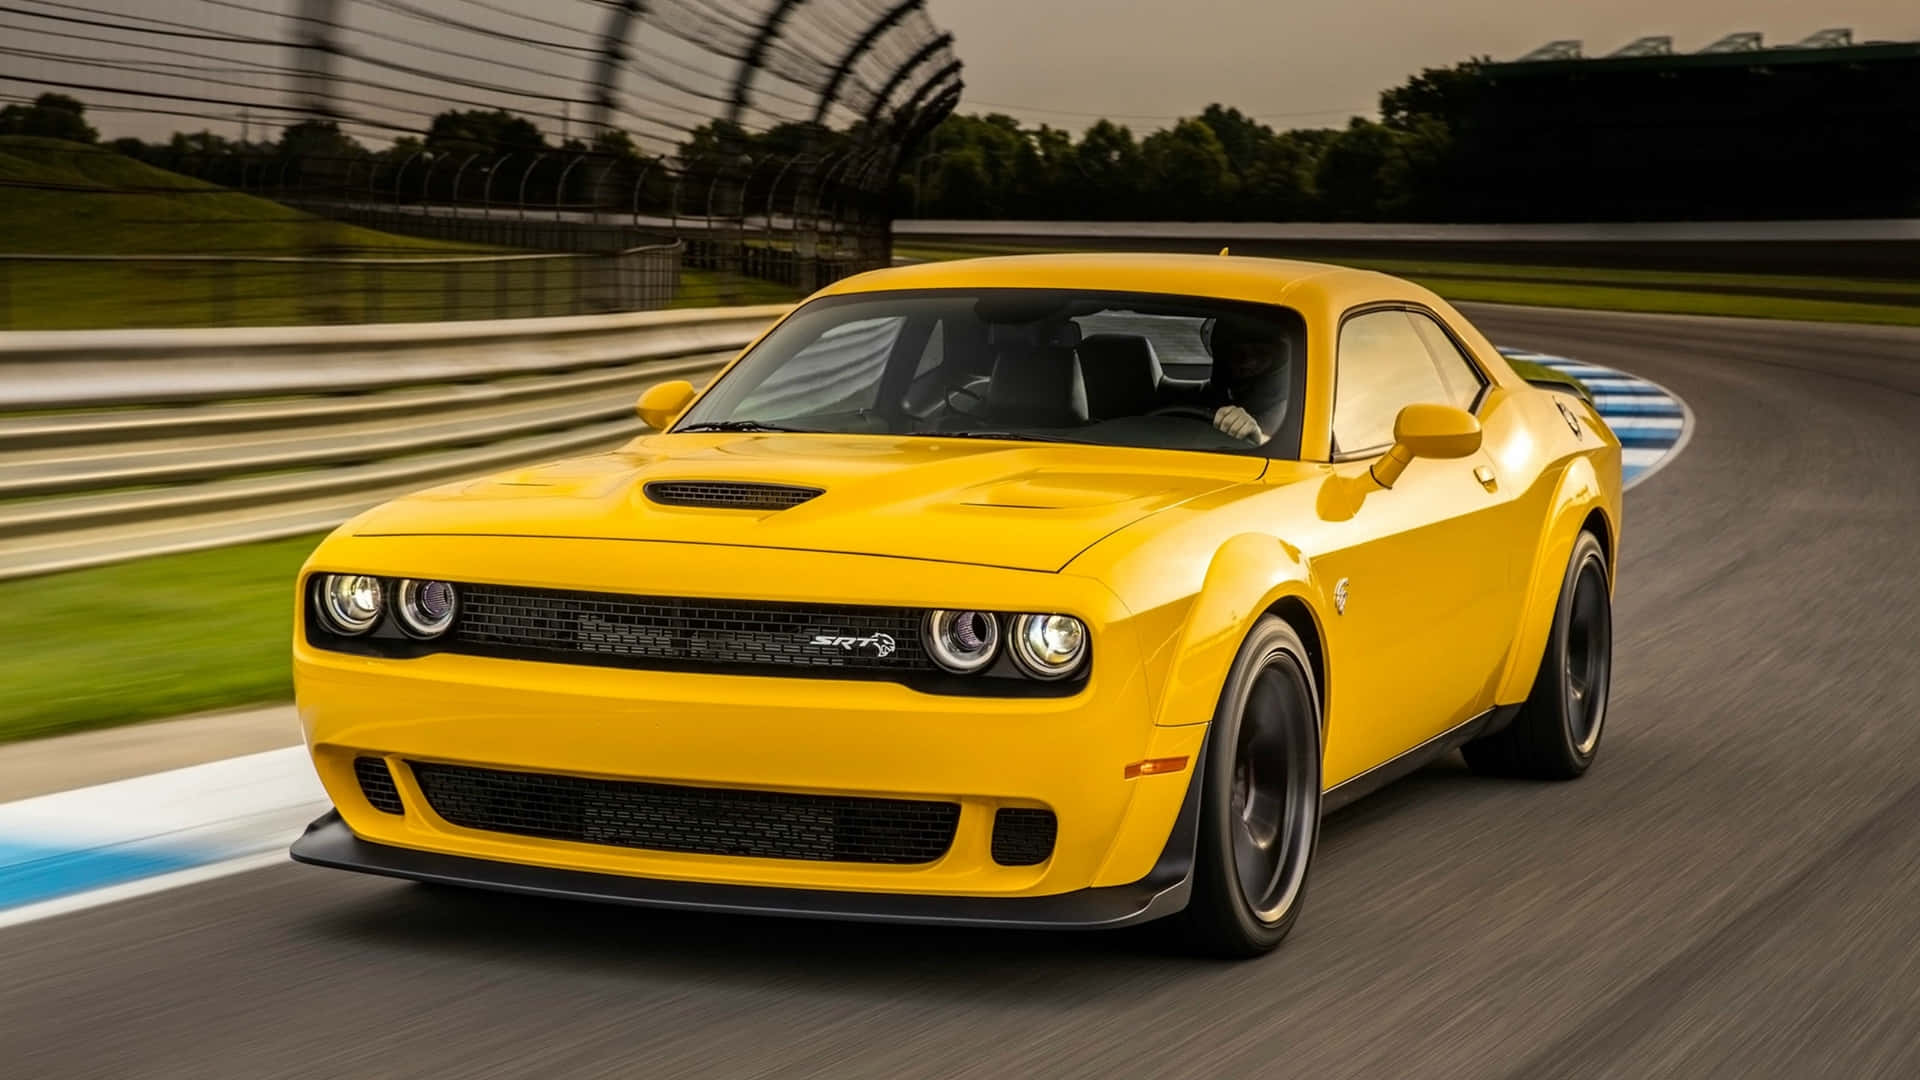 The Yellow Dodge Challenger Is Driving On A Race Track Wallpaper